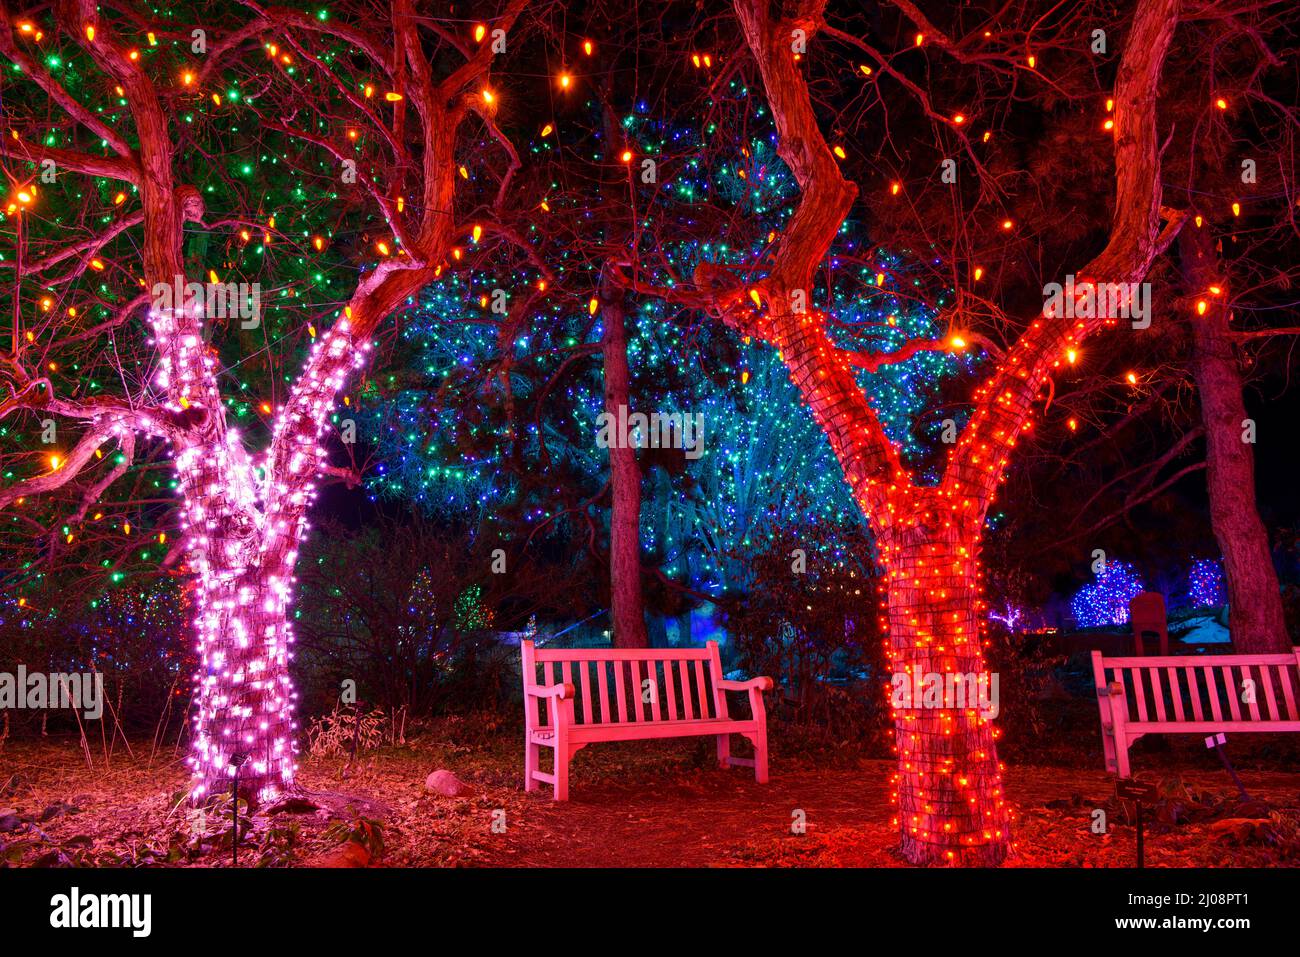 Blossoms of Light - Night view of a resting area in a grove lit by colorful lights at Denver Botanic Gardens during holiday Blossoms of Light event. Stock Photo